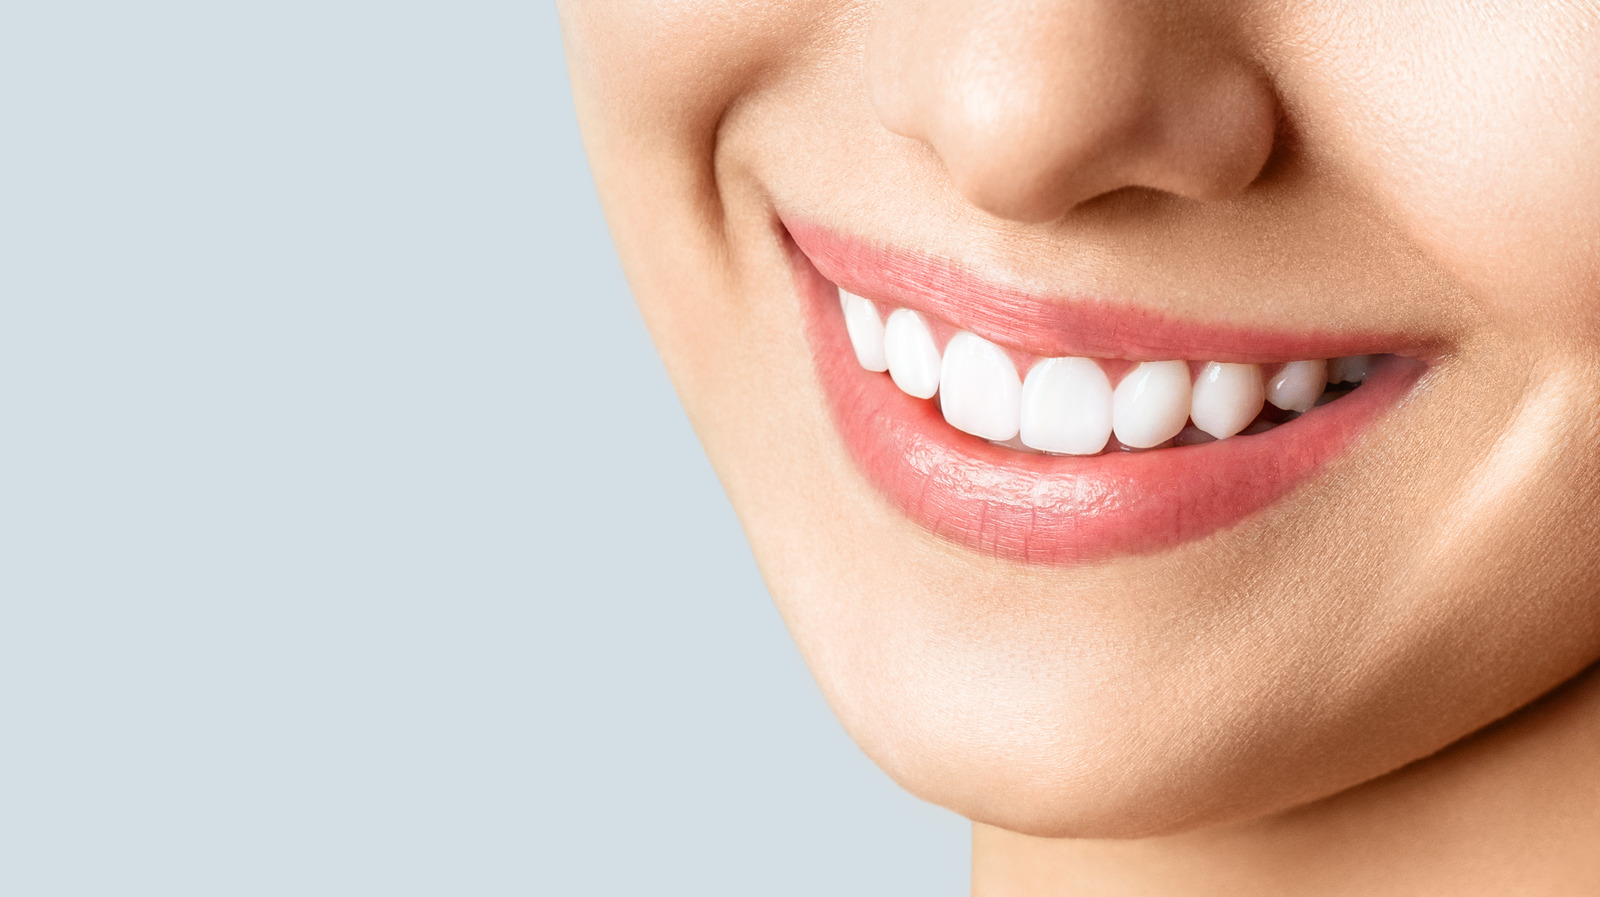 When You Use A Whitening Treatment Every Day, This Is What Happens To Your Teeth